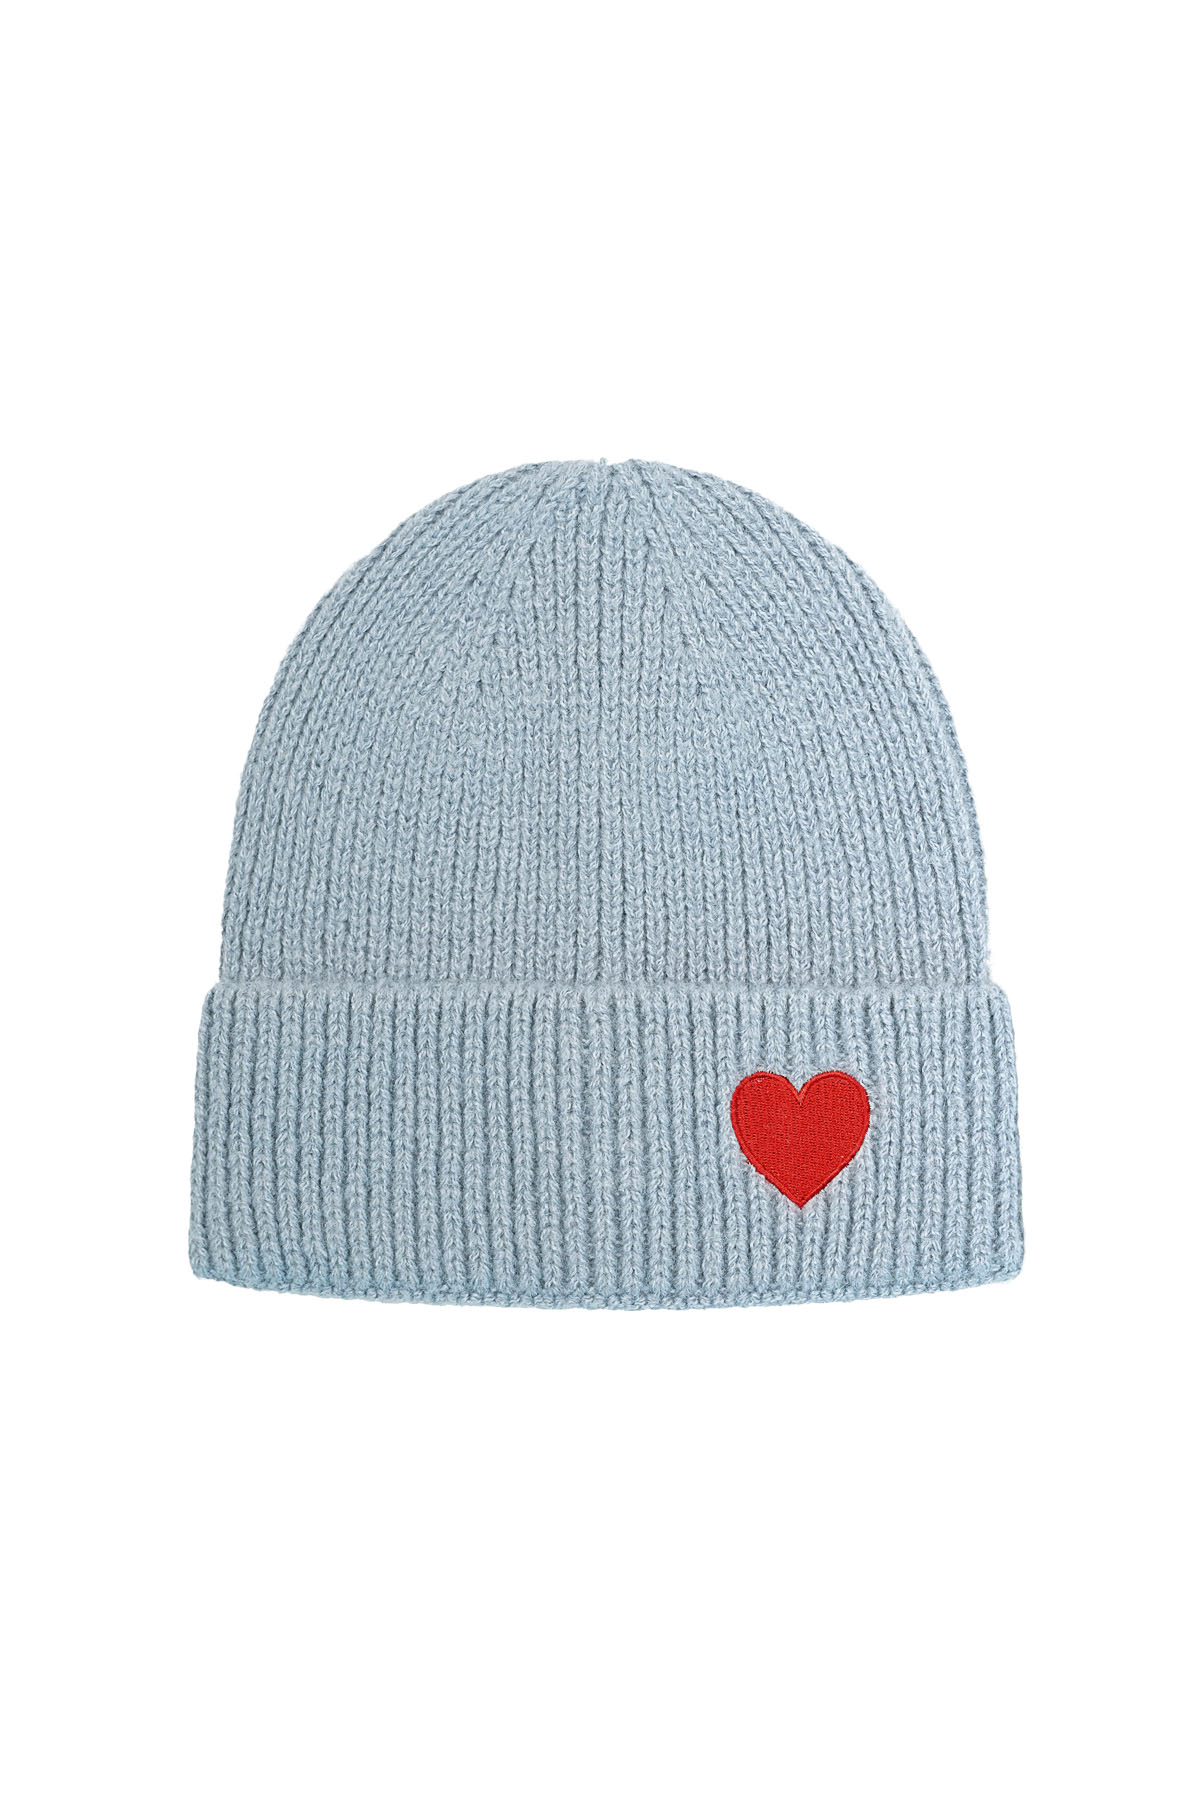 Hat with heart detail - blue